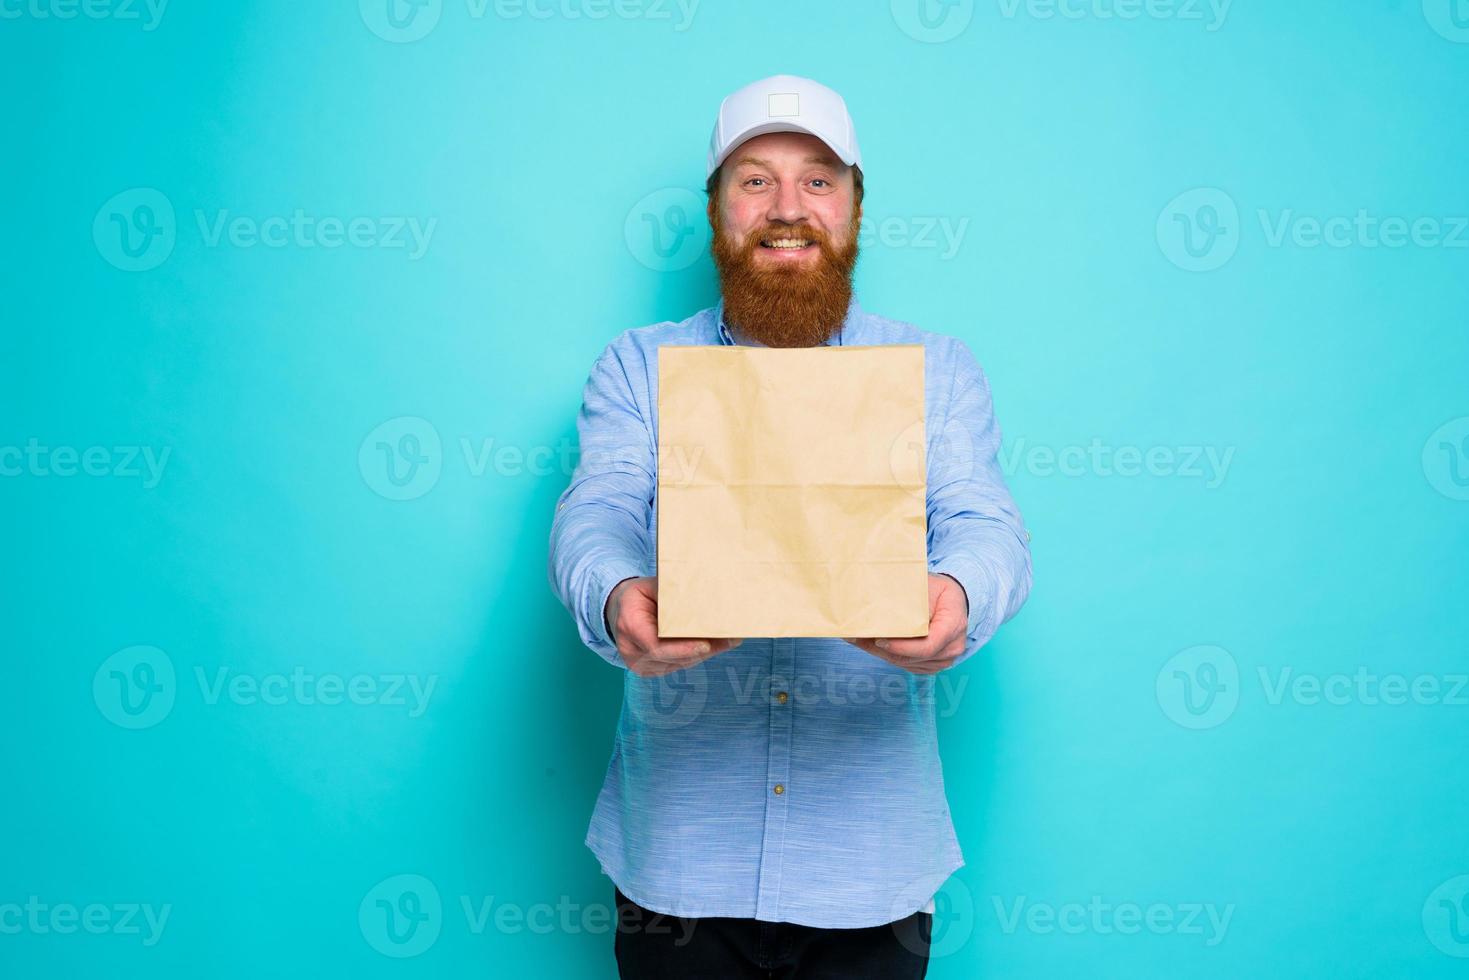 Deliveryman with happy expression is ready to deliver a food package photo